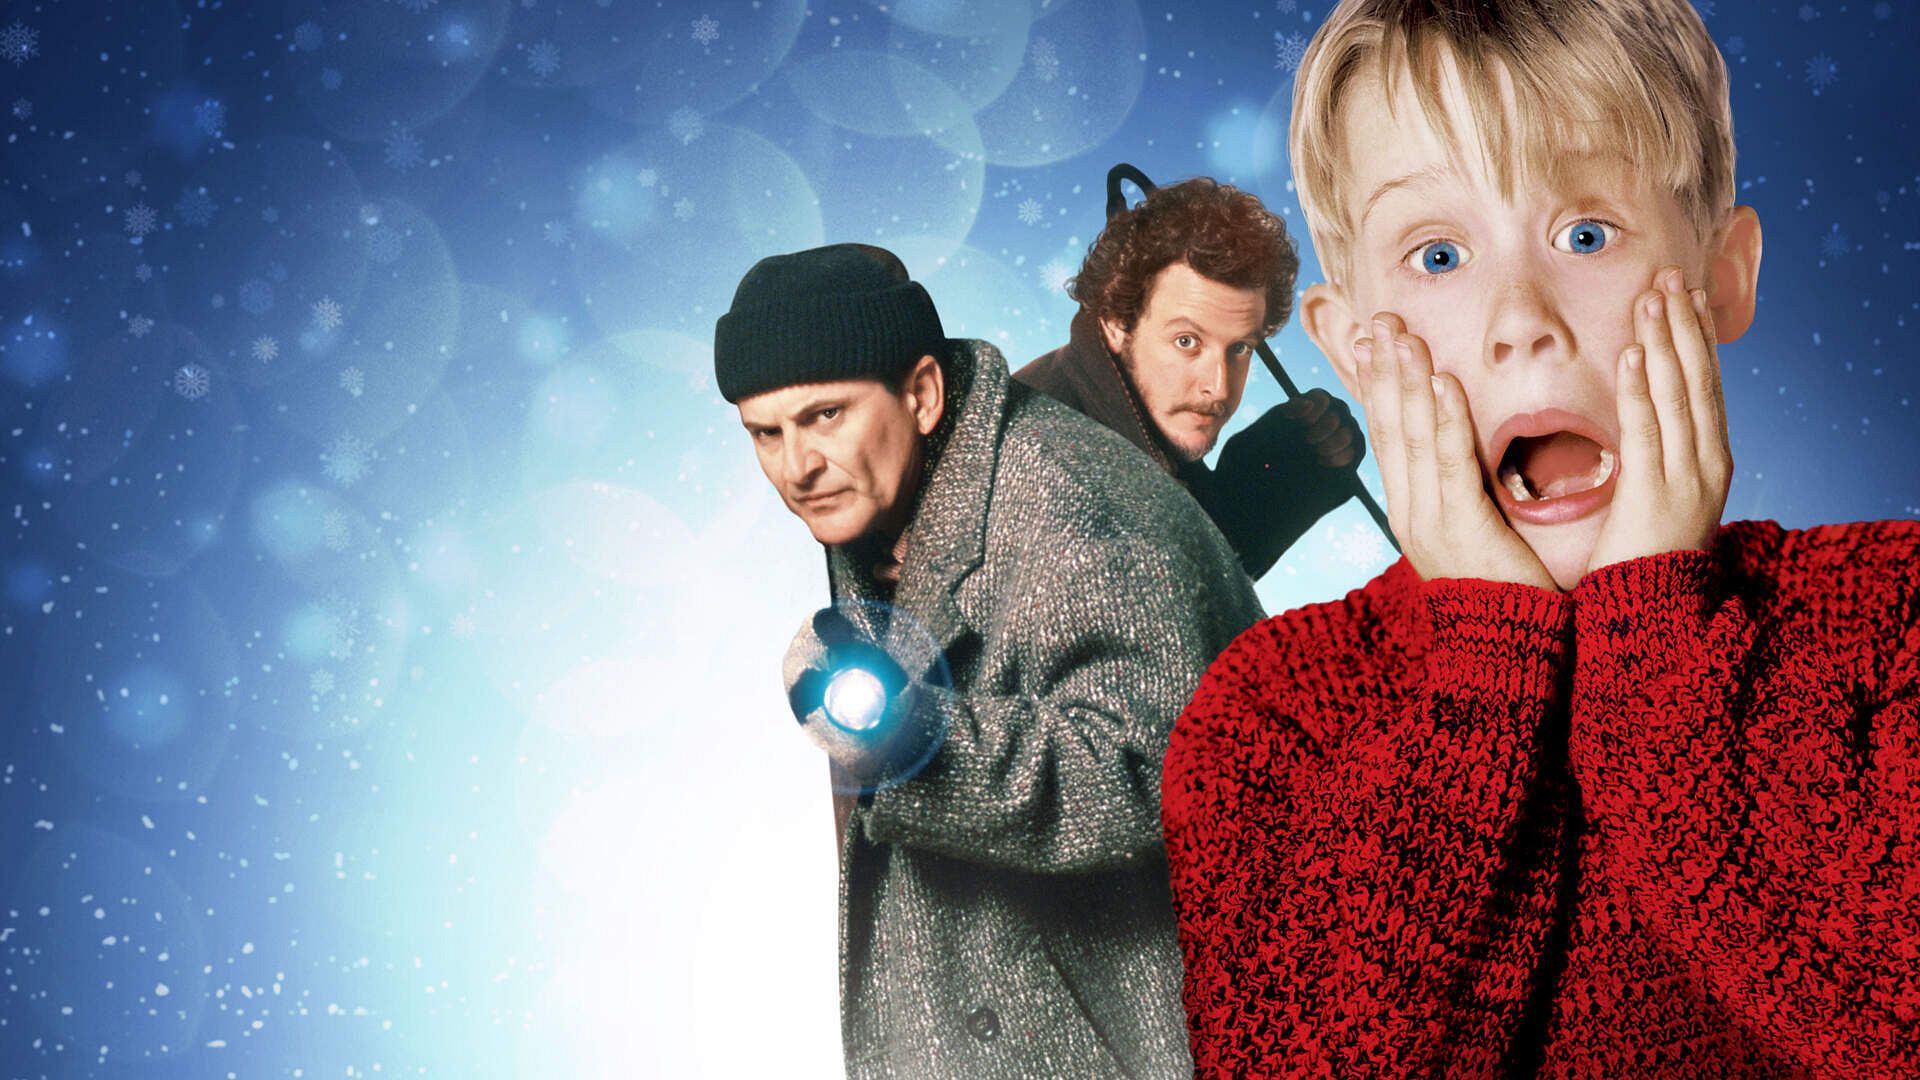 Home Alone Tickets at Melrose Rooftop Theatre in West Hollywood by